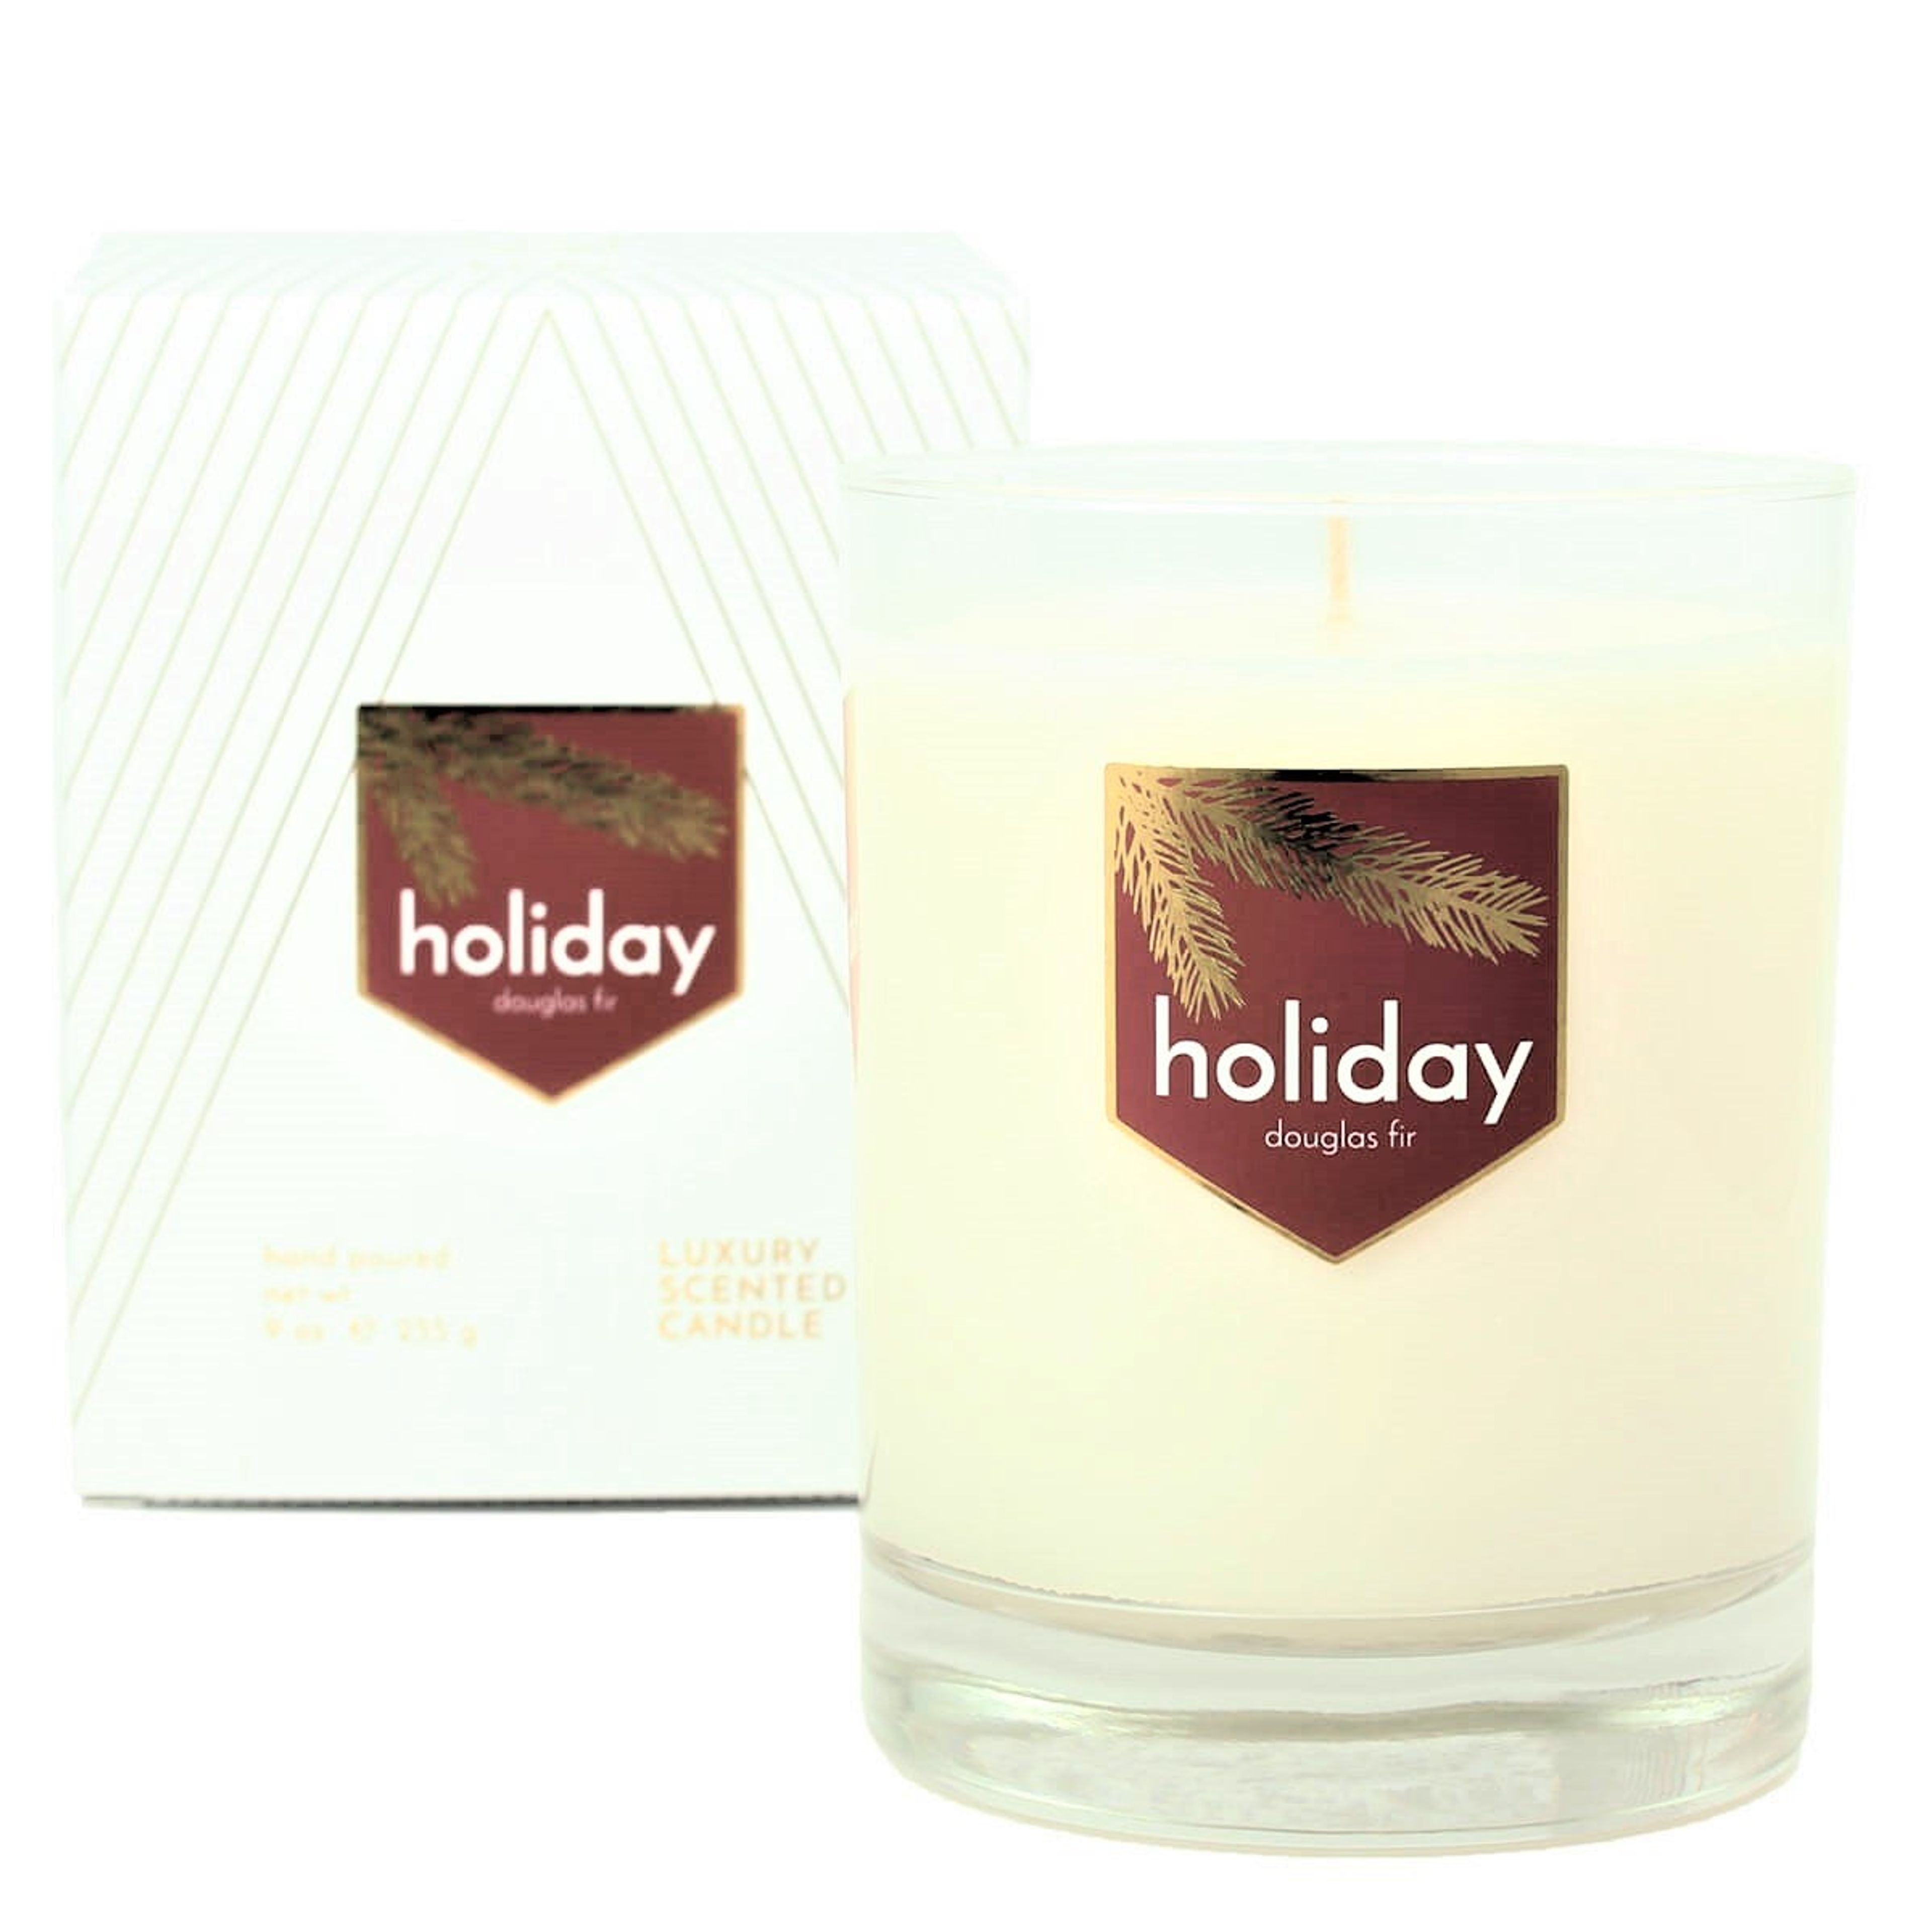 Holiday Douglas Fir Scented Soy Candle